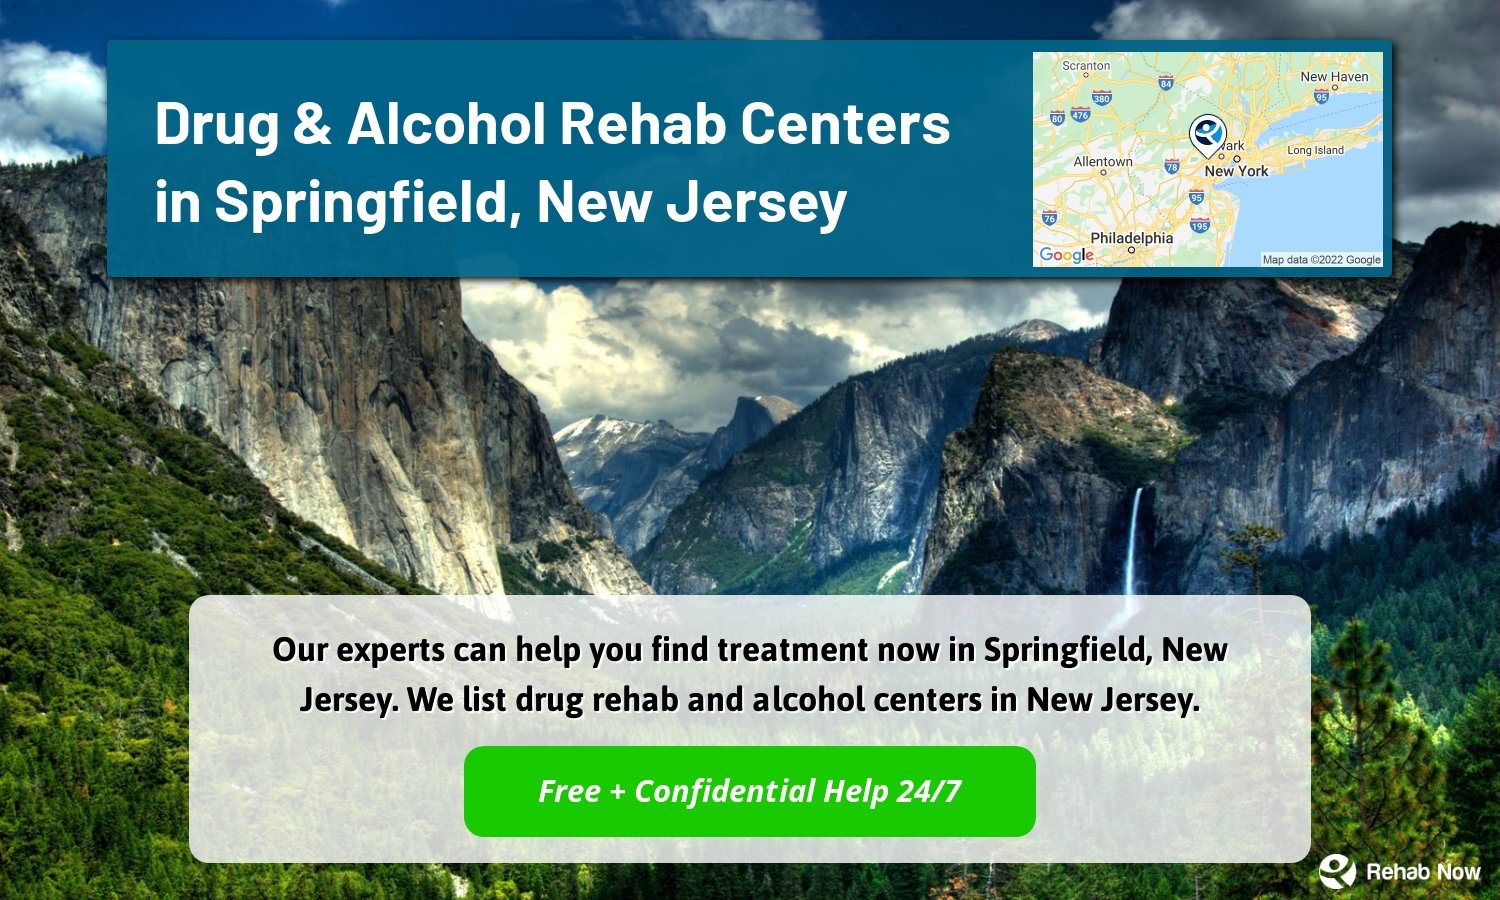 Our experts can help you find treatment now in Springfield, New Jersey. We list drug rehab and alcohol centers in New Jersey.